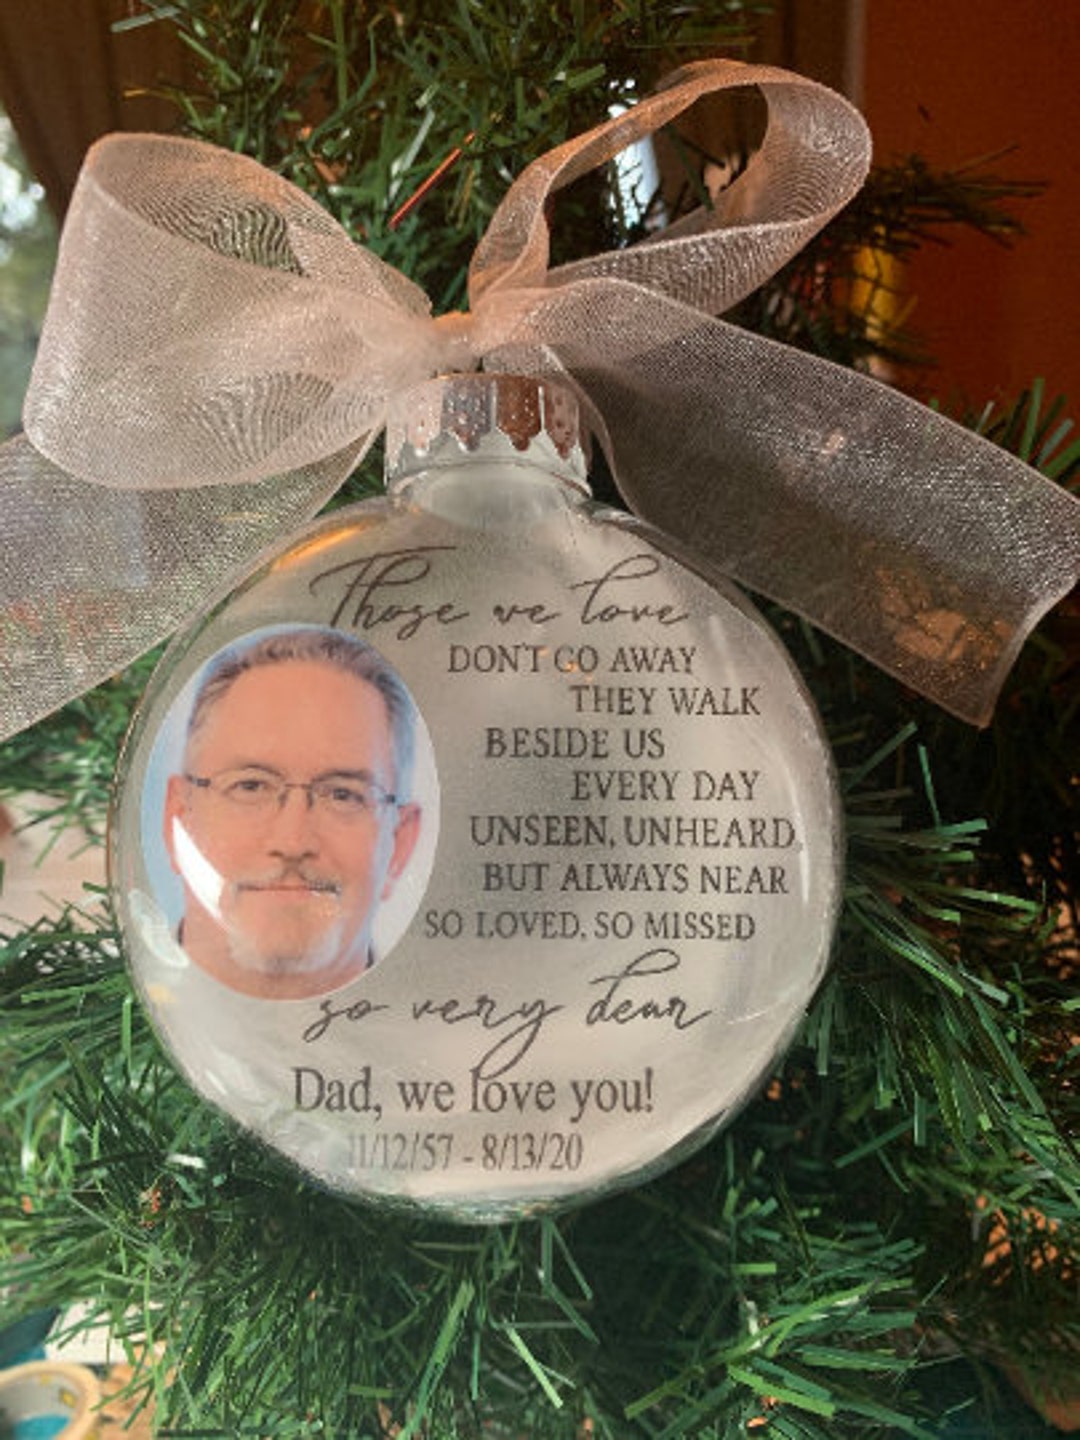 PERSONALIZED Photo Memorial Ornament 4 Christmas Ornament in Memory of ...